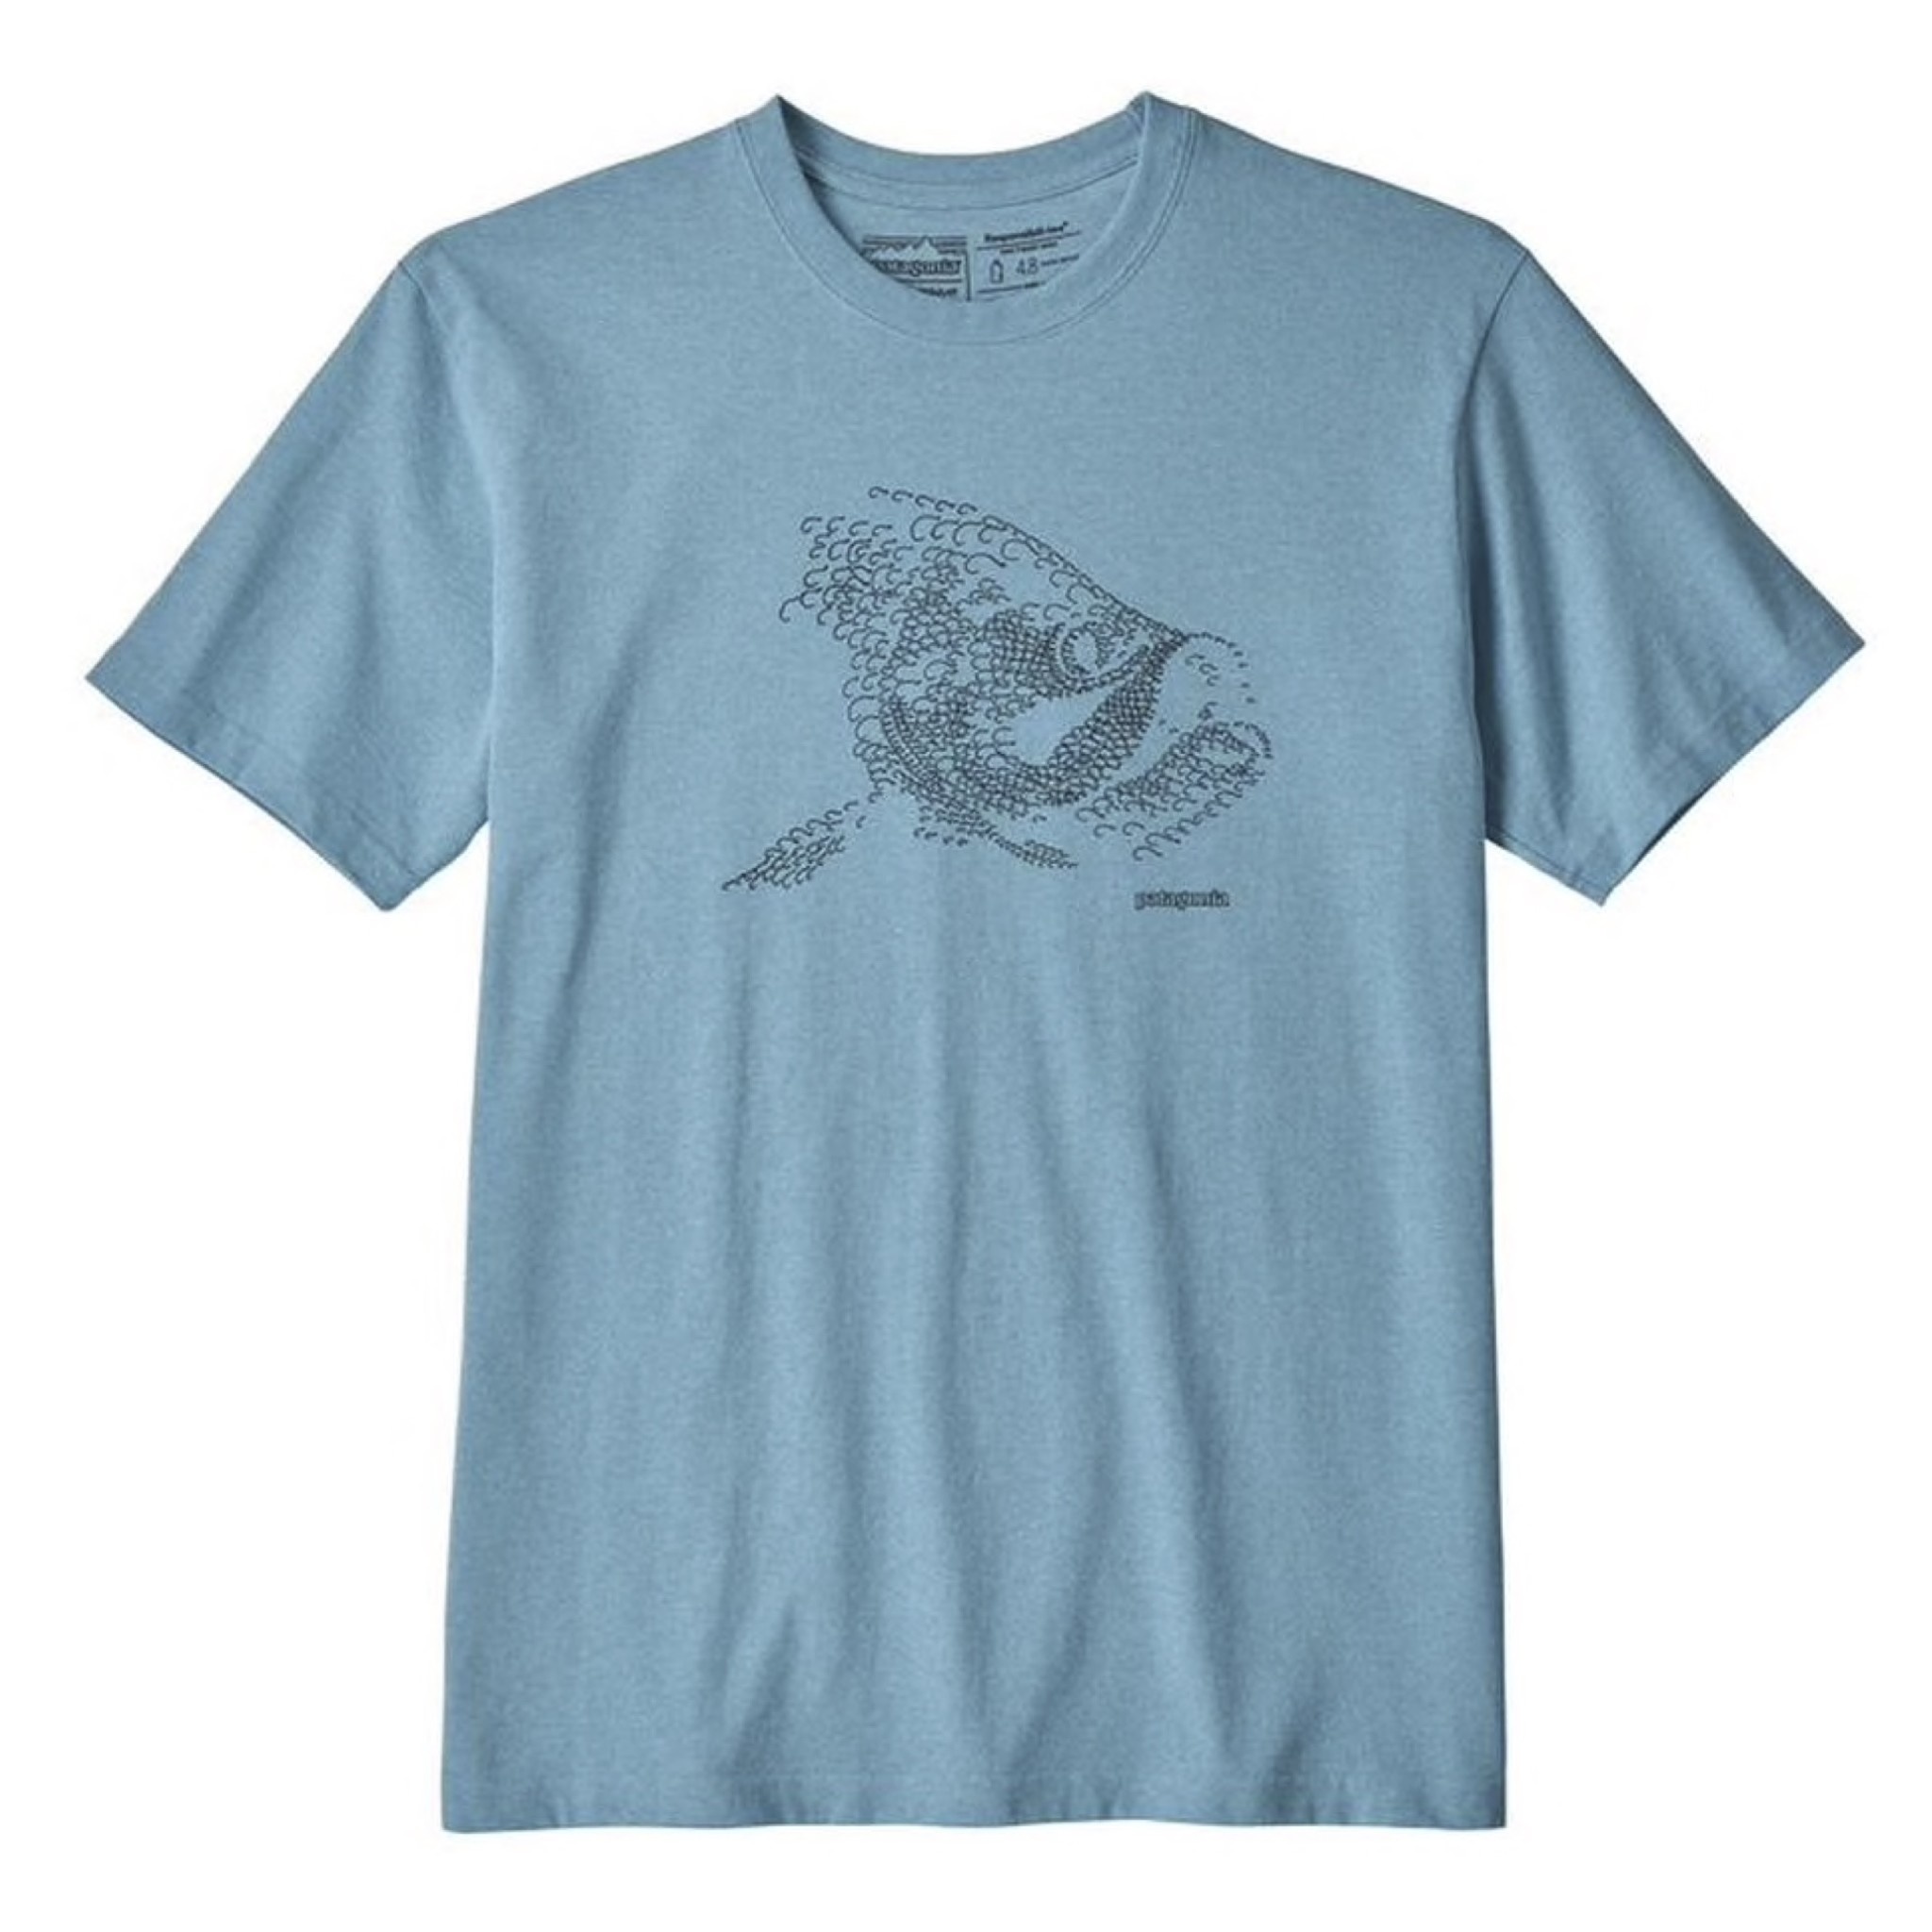 Patagonia M's Hooked Head Responsibili-Tee - Classic Navy w/ Trout - Small